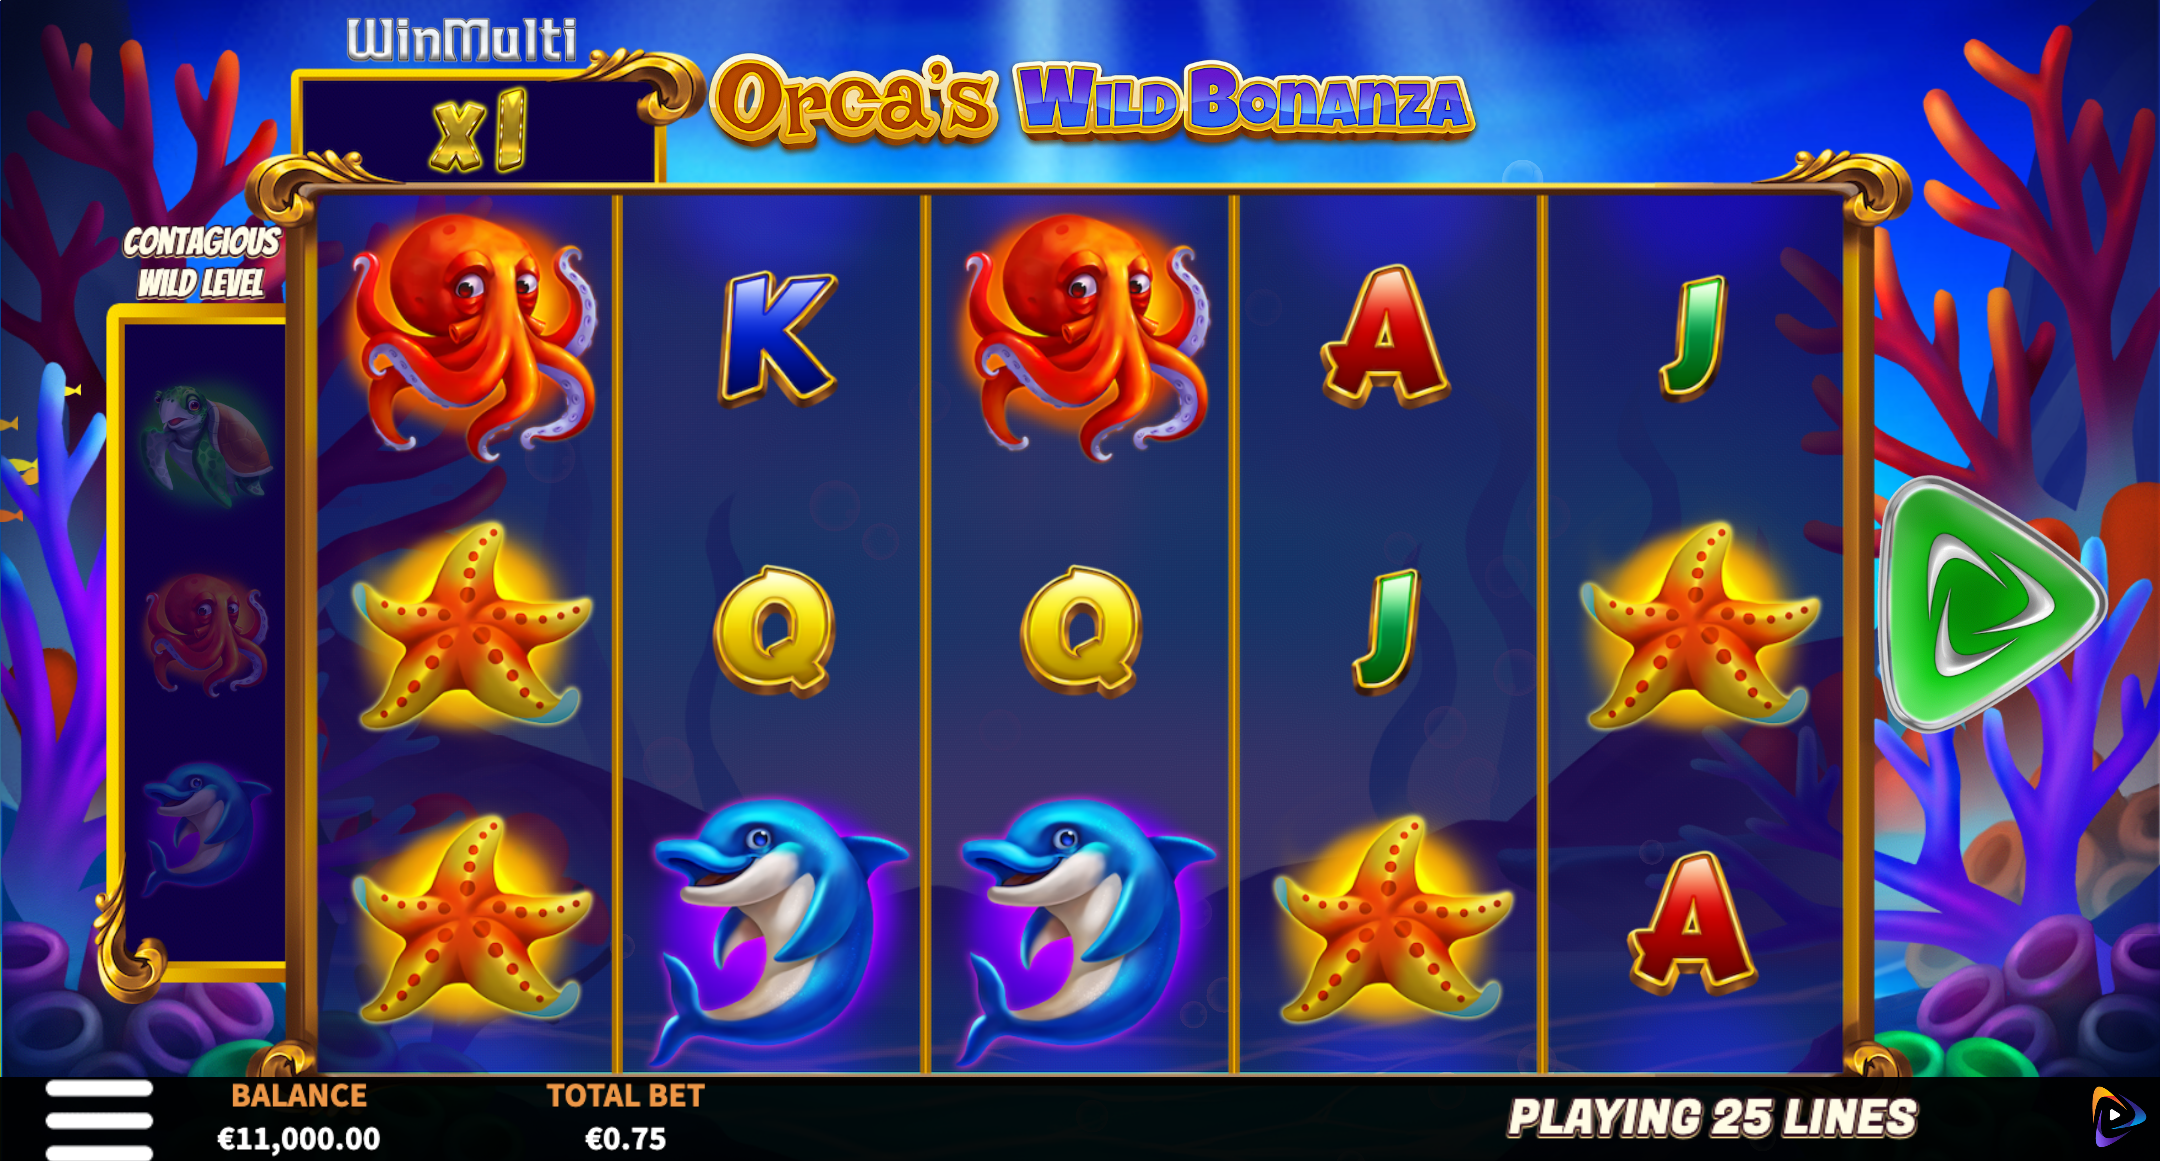 Play Orca's Wild Bonanza - The Ultimate Slot Game Experience reliable site